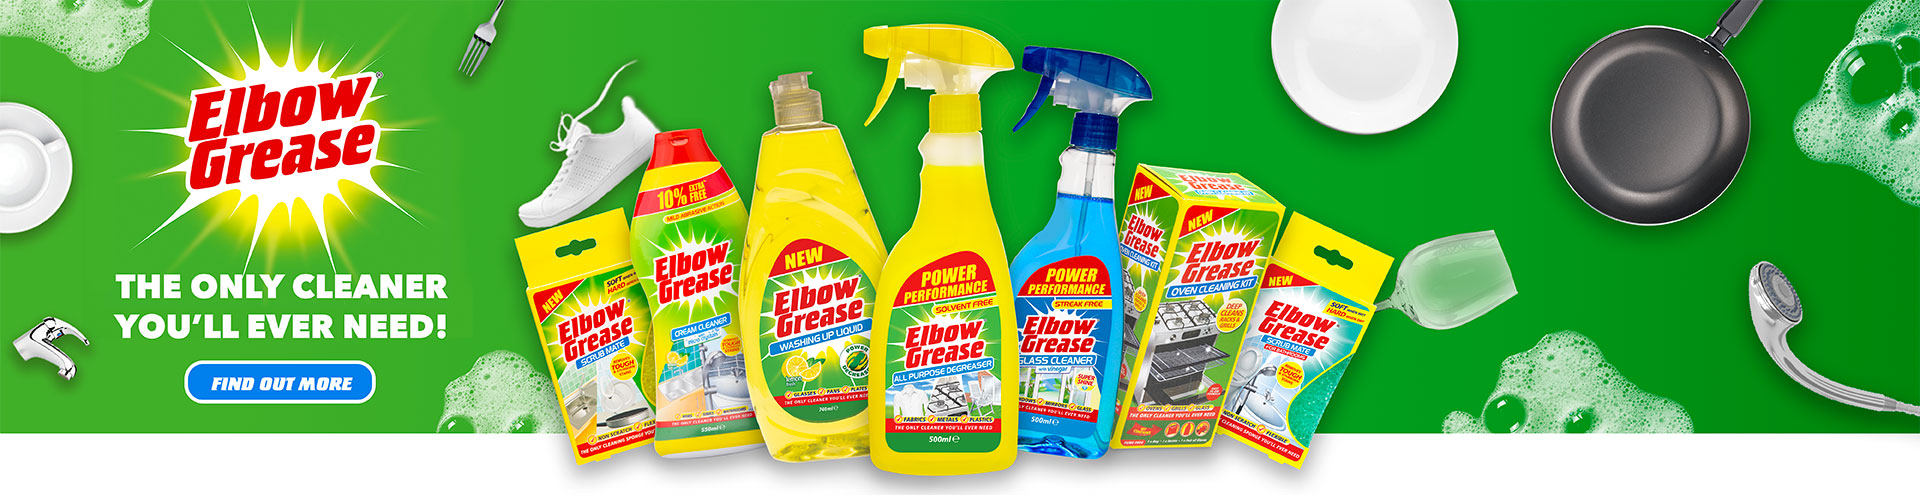 Elbow Grease®, Degreaser Cleaner